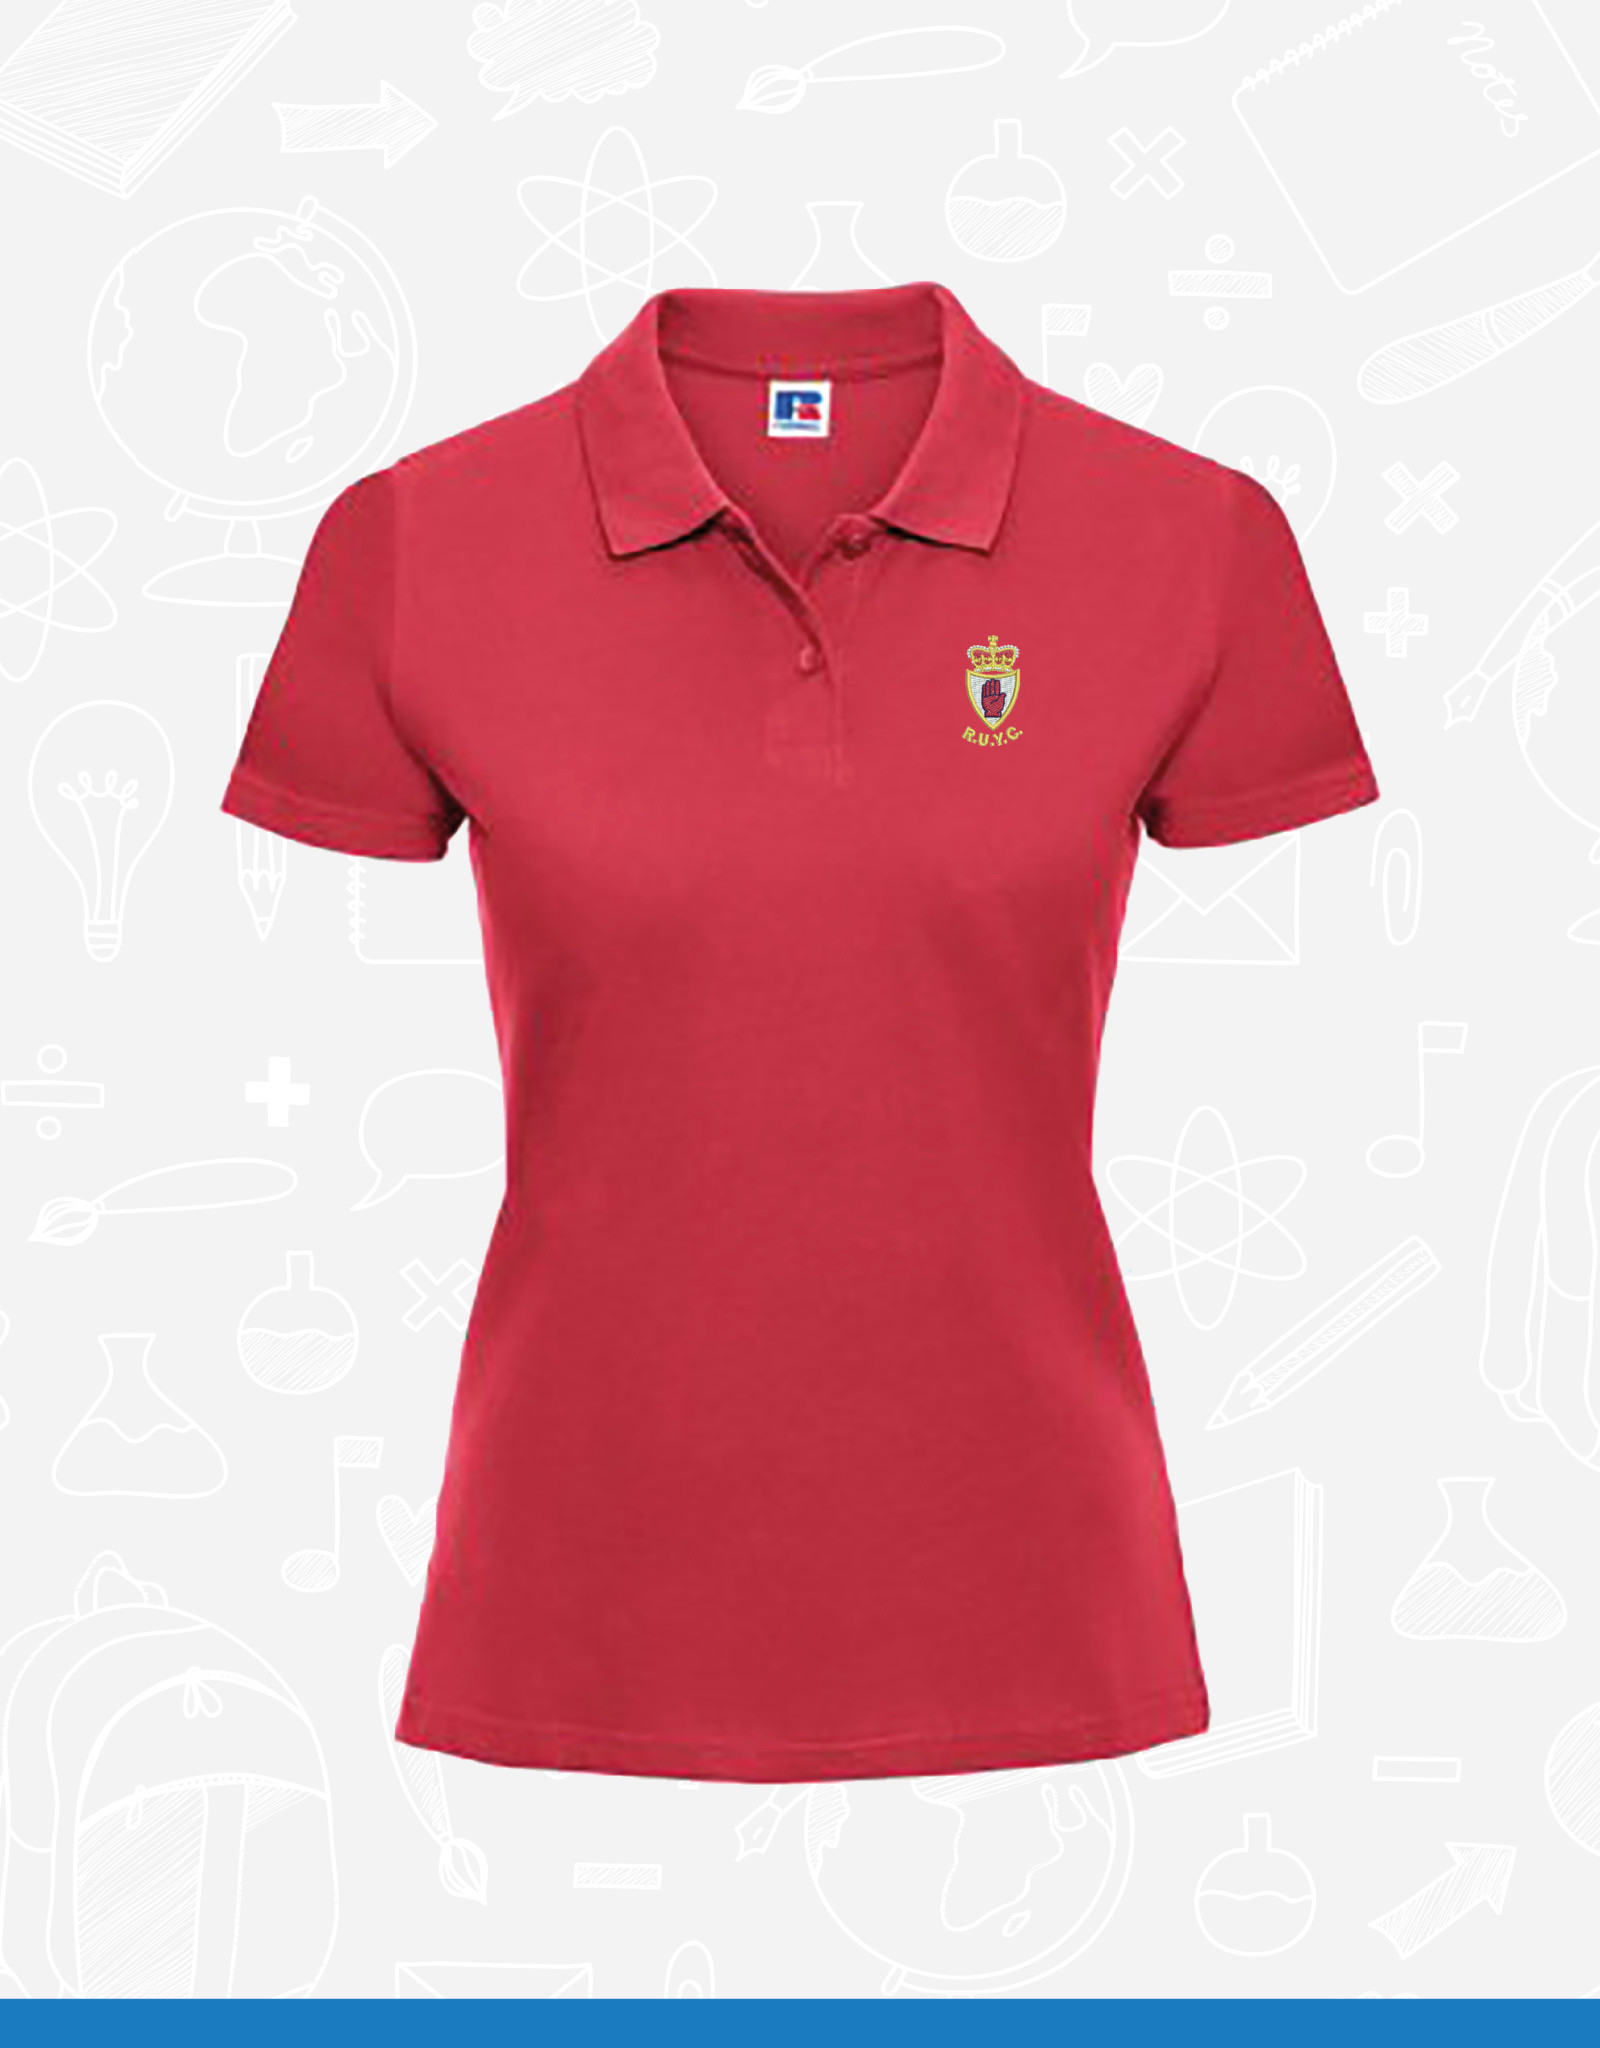 Russell RUYC Ladies Cotton Polo Shirt (569F)